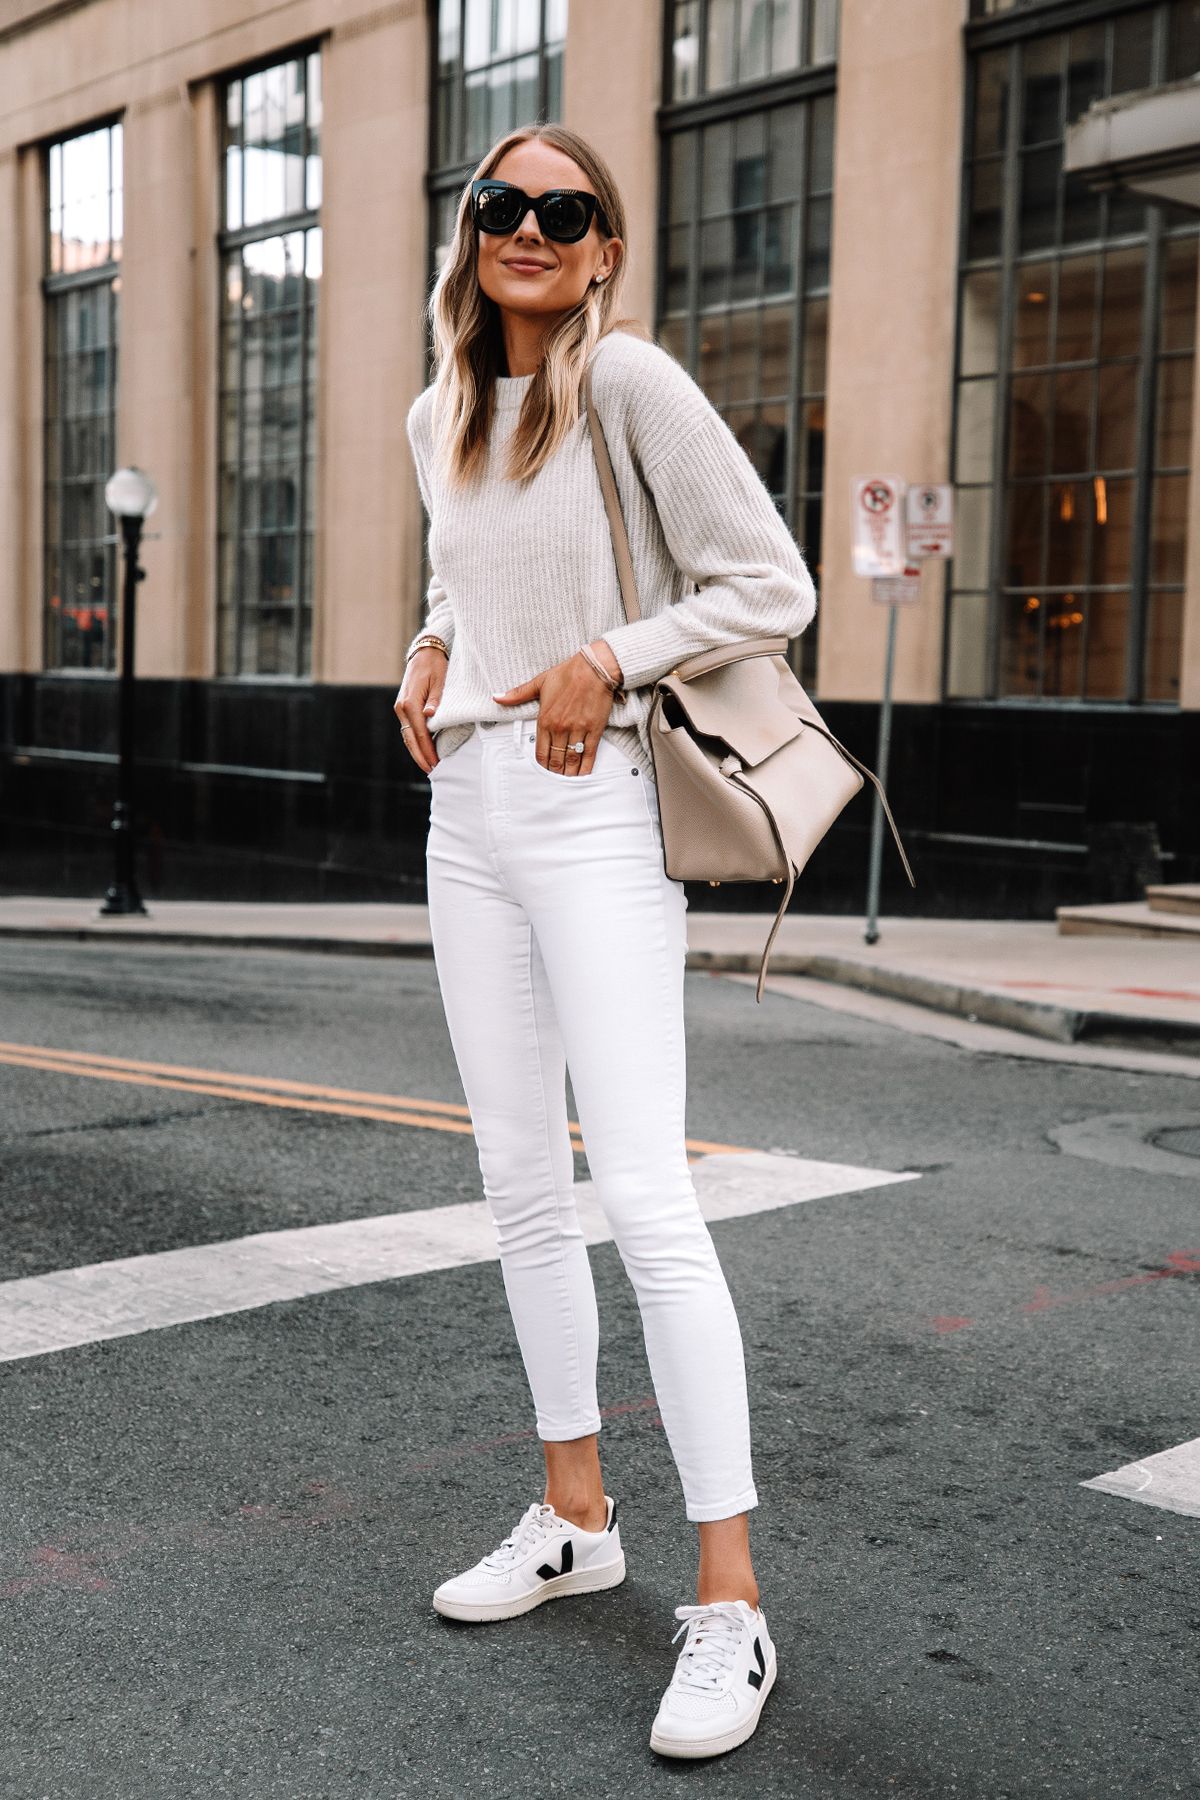 Make your unique style by wearing white
skinny jeans